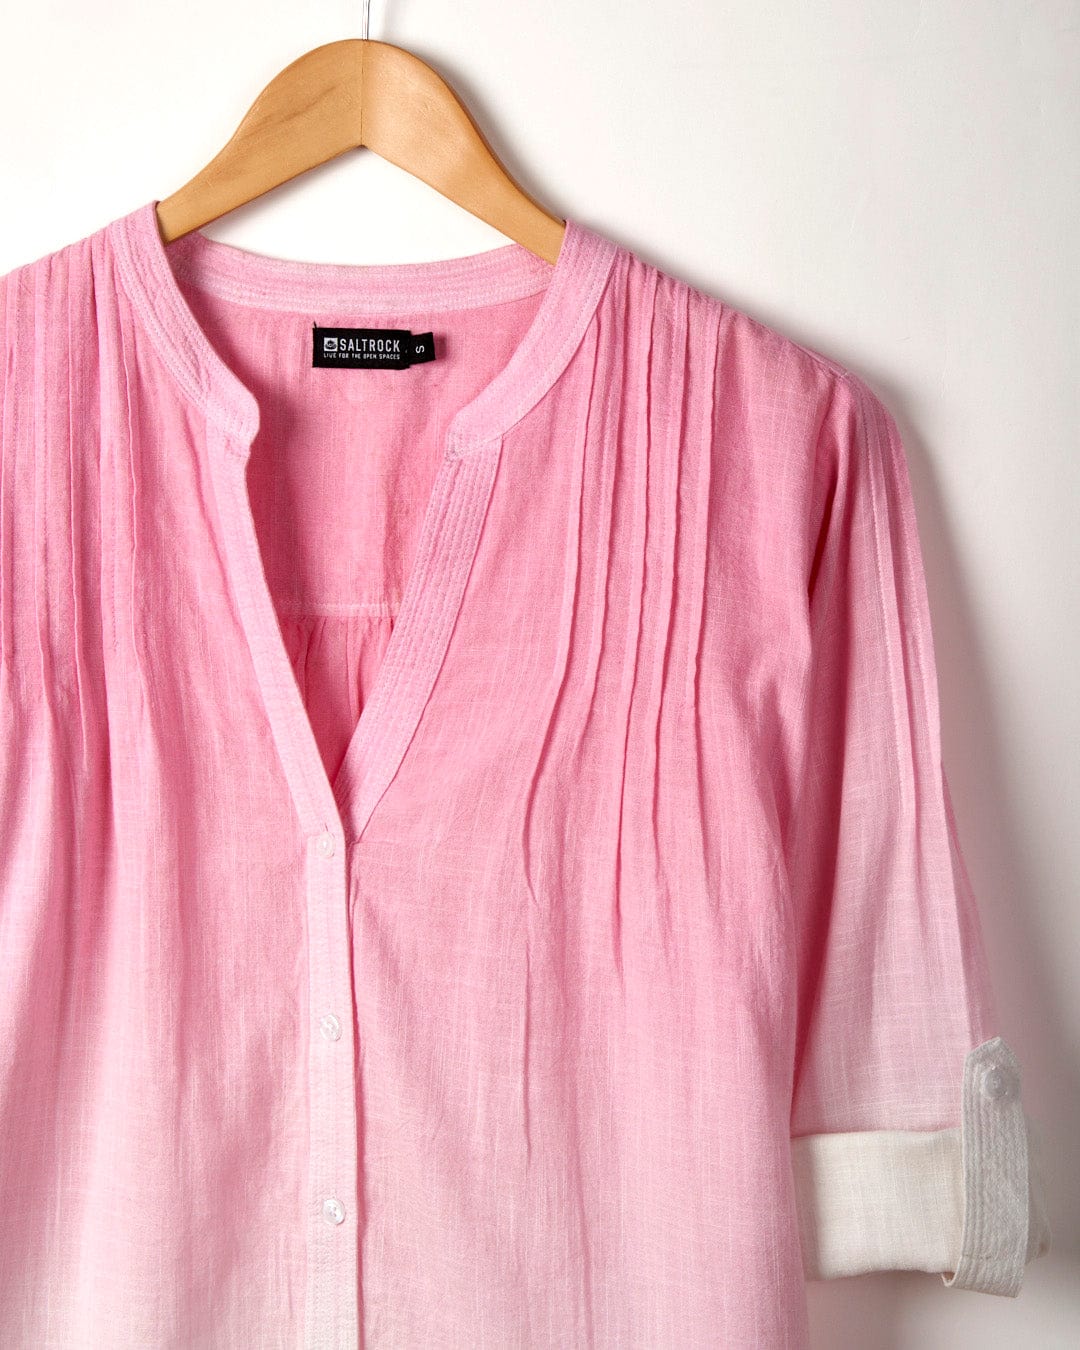 A Karthi - Womens Long Sleeve Shirt - Pink/White with vertical pleats, hanging on a wooden hanger. It features a white cuffed sleeve, an oversized fit, and a 'Saltrock' label inside the collar, made from lightweight cotton material.